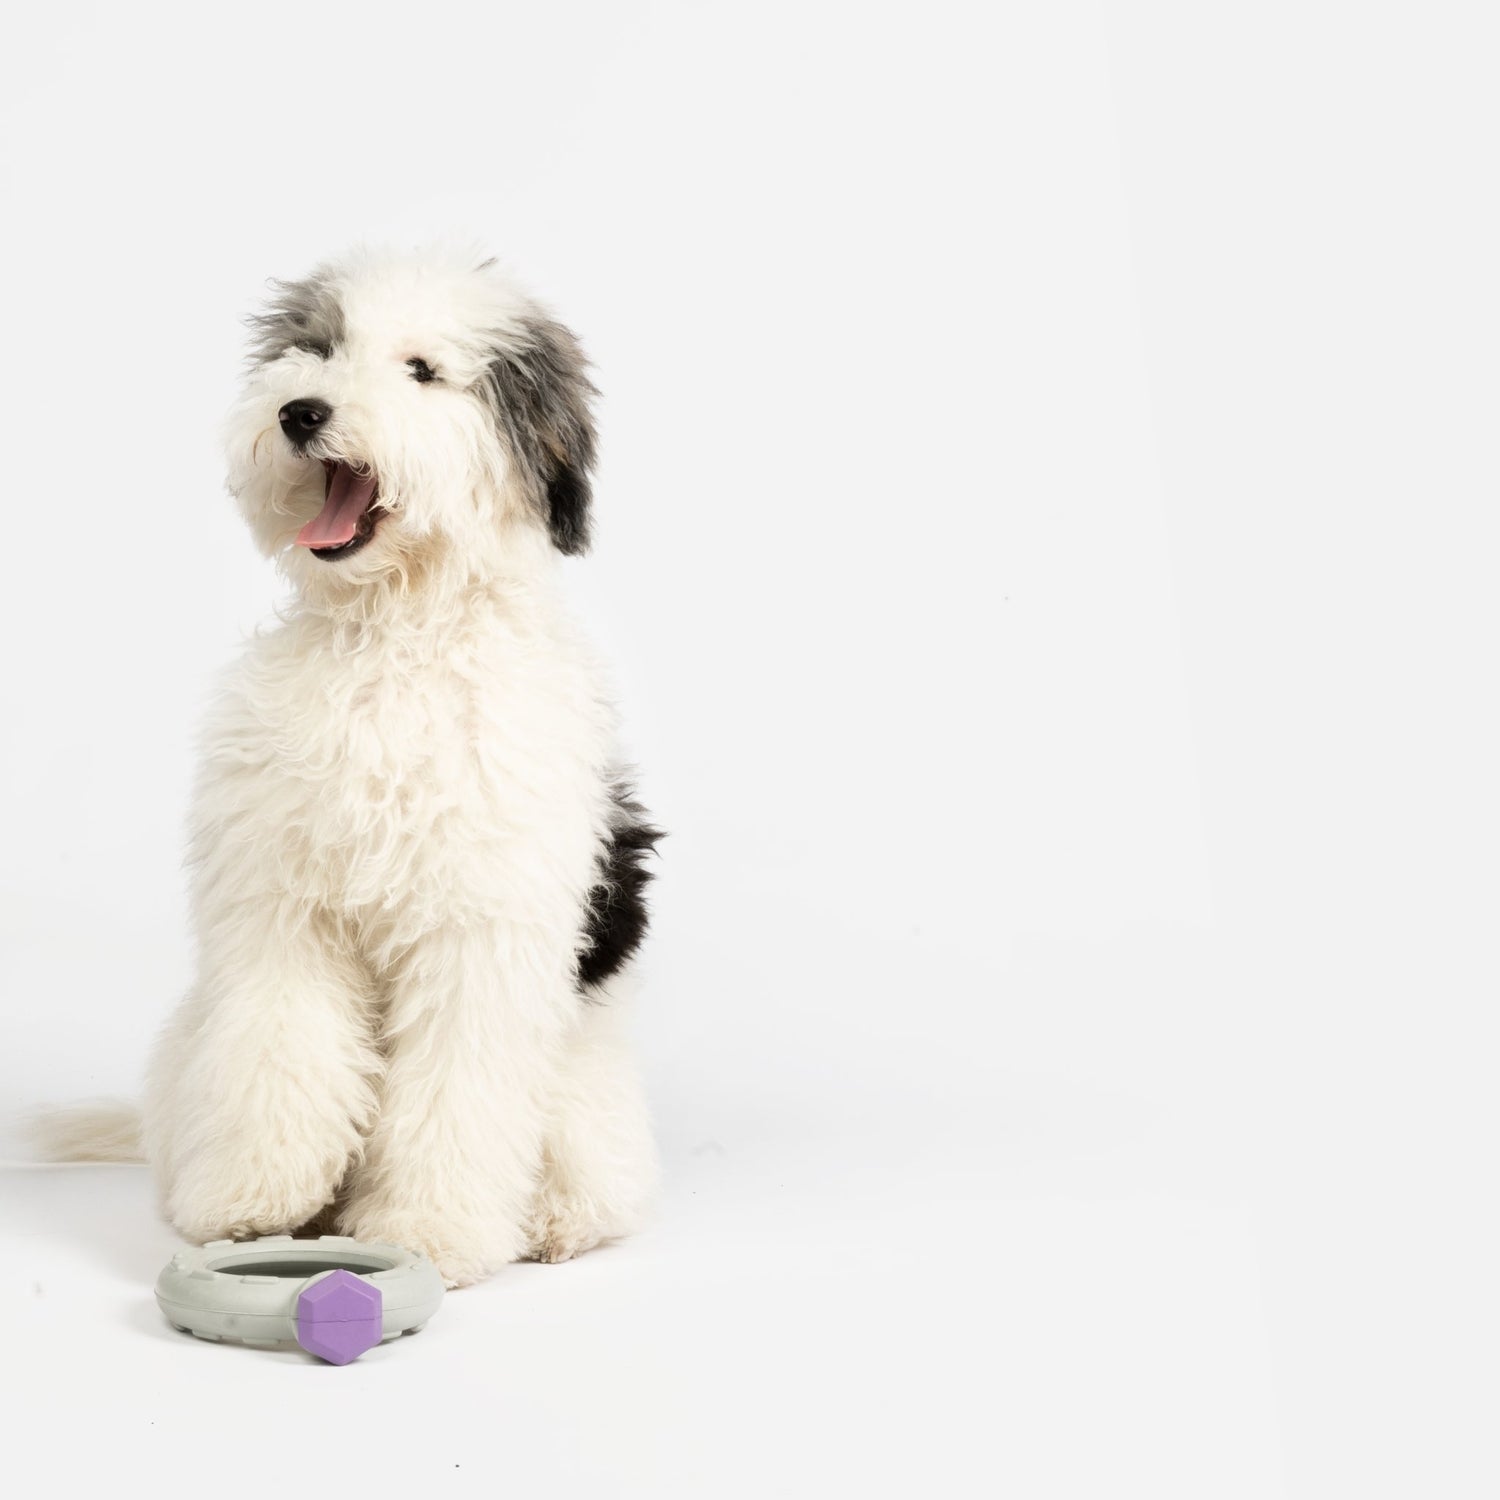 The Smelly Sock: The Only Dog Toy That Smells Like You! by Paw and